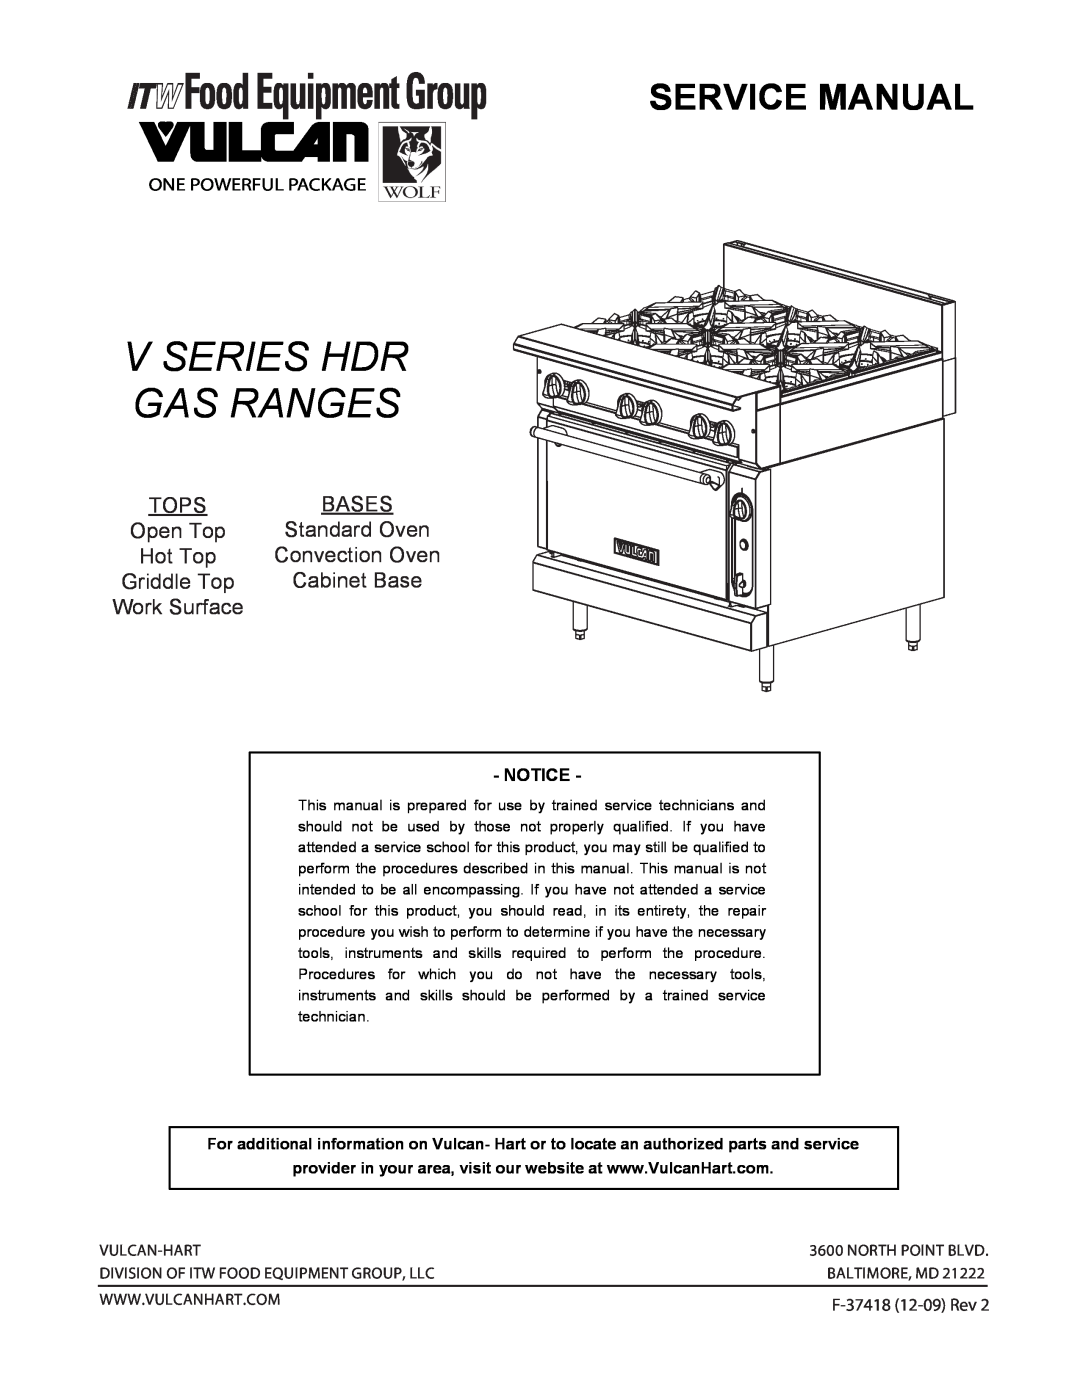 Vulcan-Hart F-37418 service manual V Series Hdr Gas Ranges, Tops, Open Top, Standard Oven, Hot Top, Convection Oven, Bases 